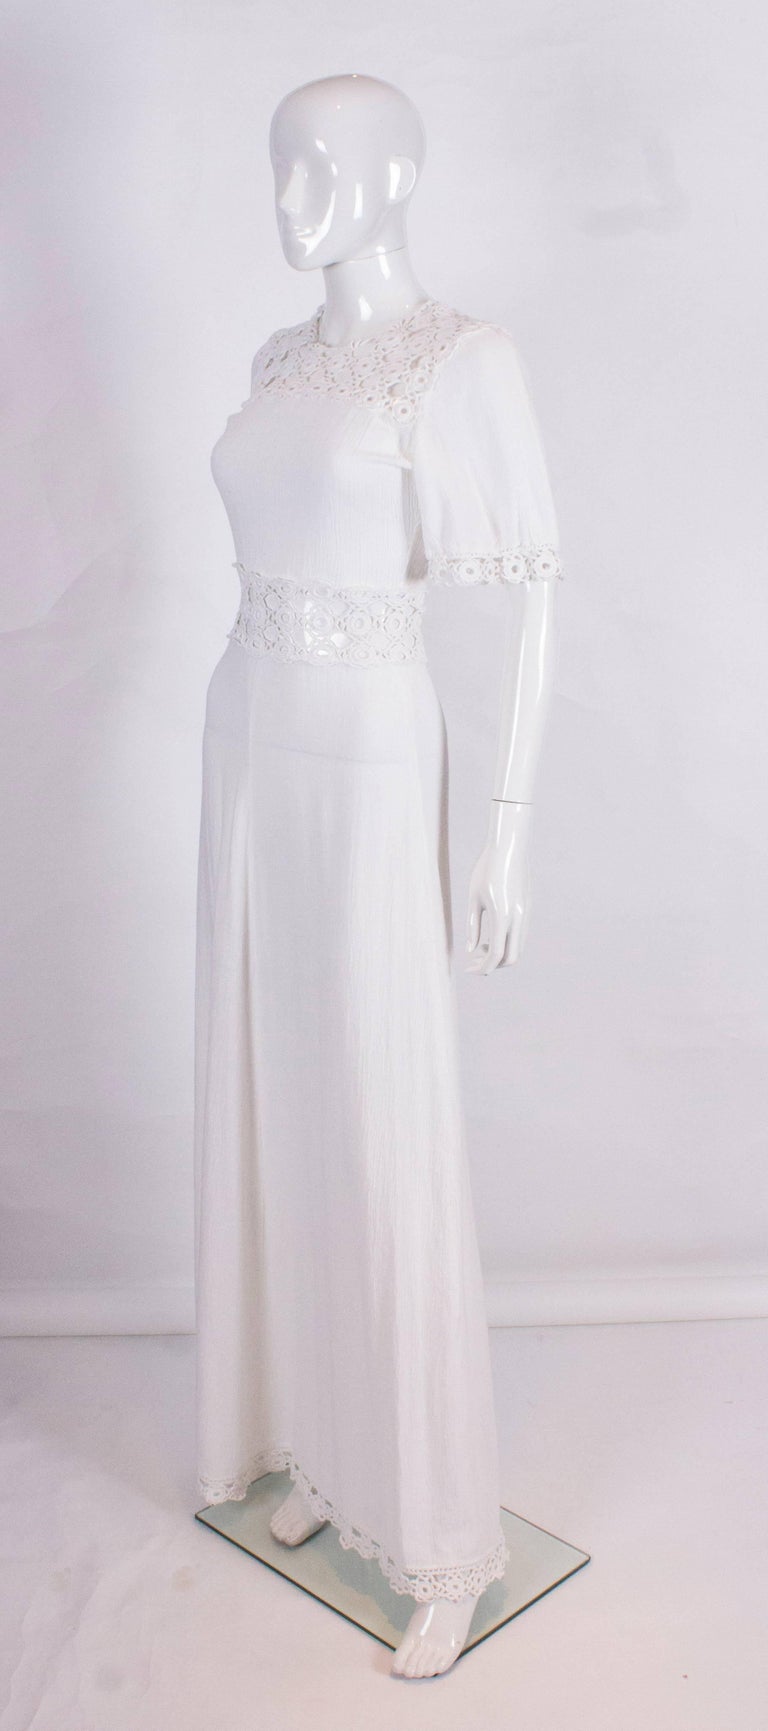 White Cheesecloth Summer Dress with Crochet Detail For Sale at 1stdibs